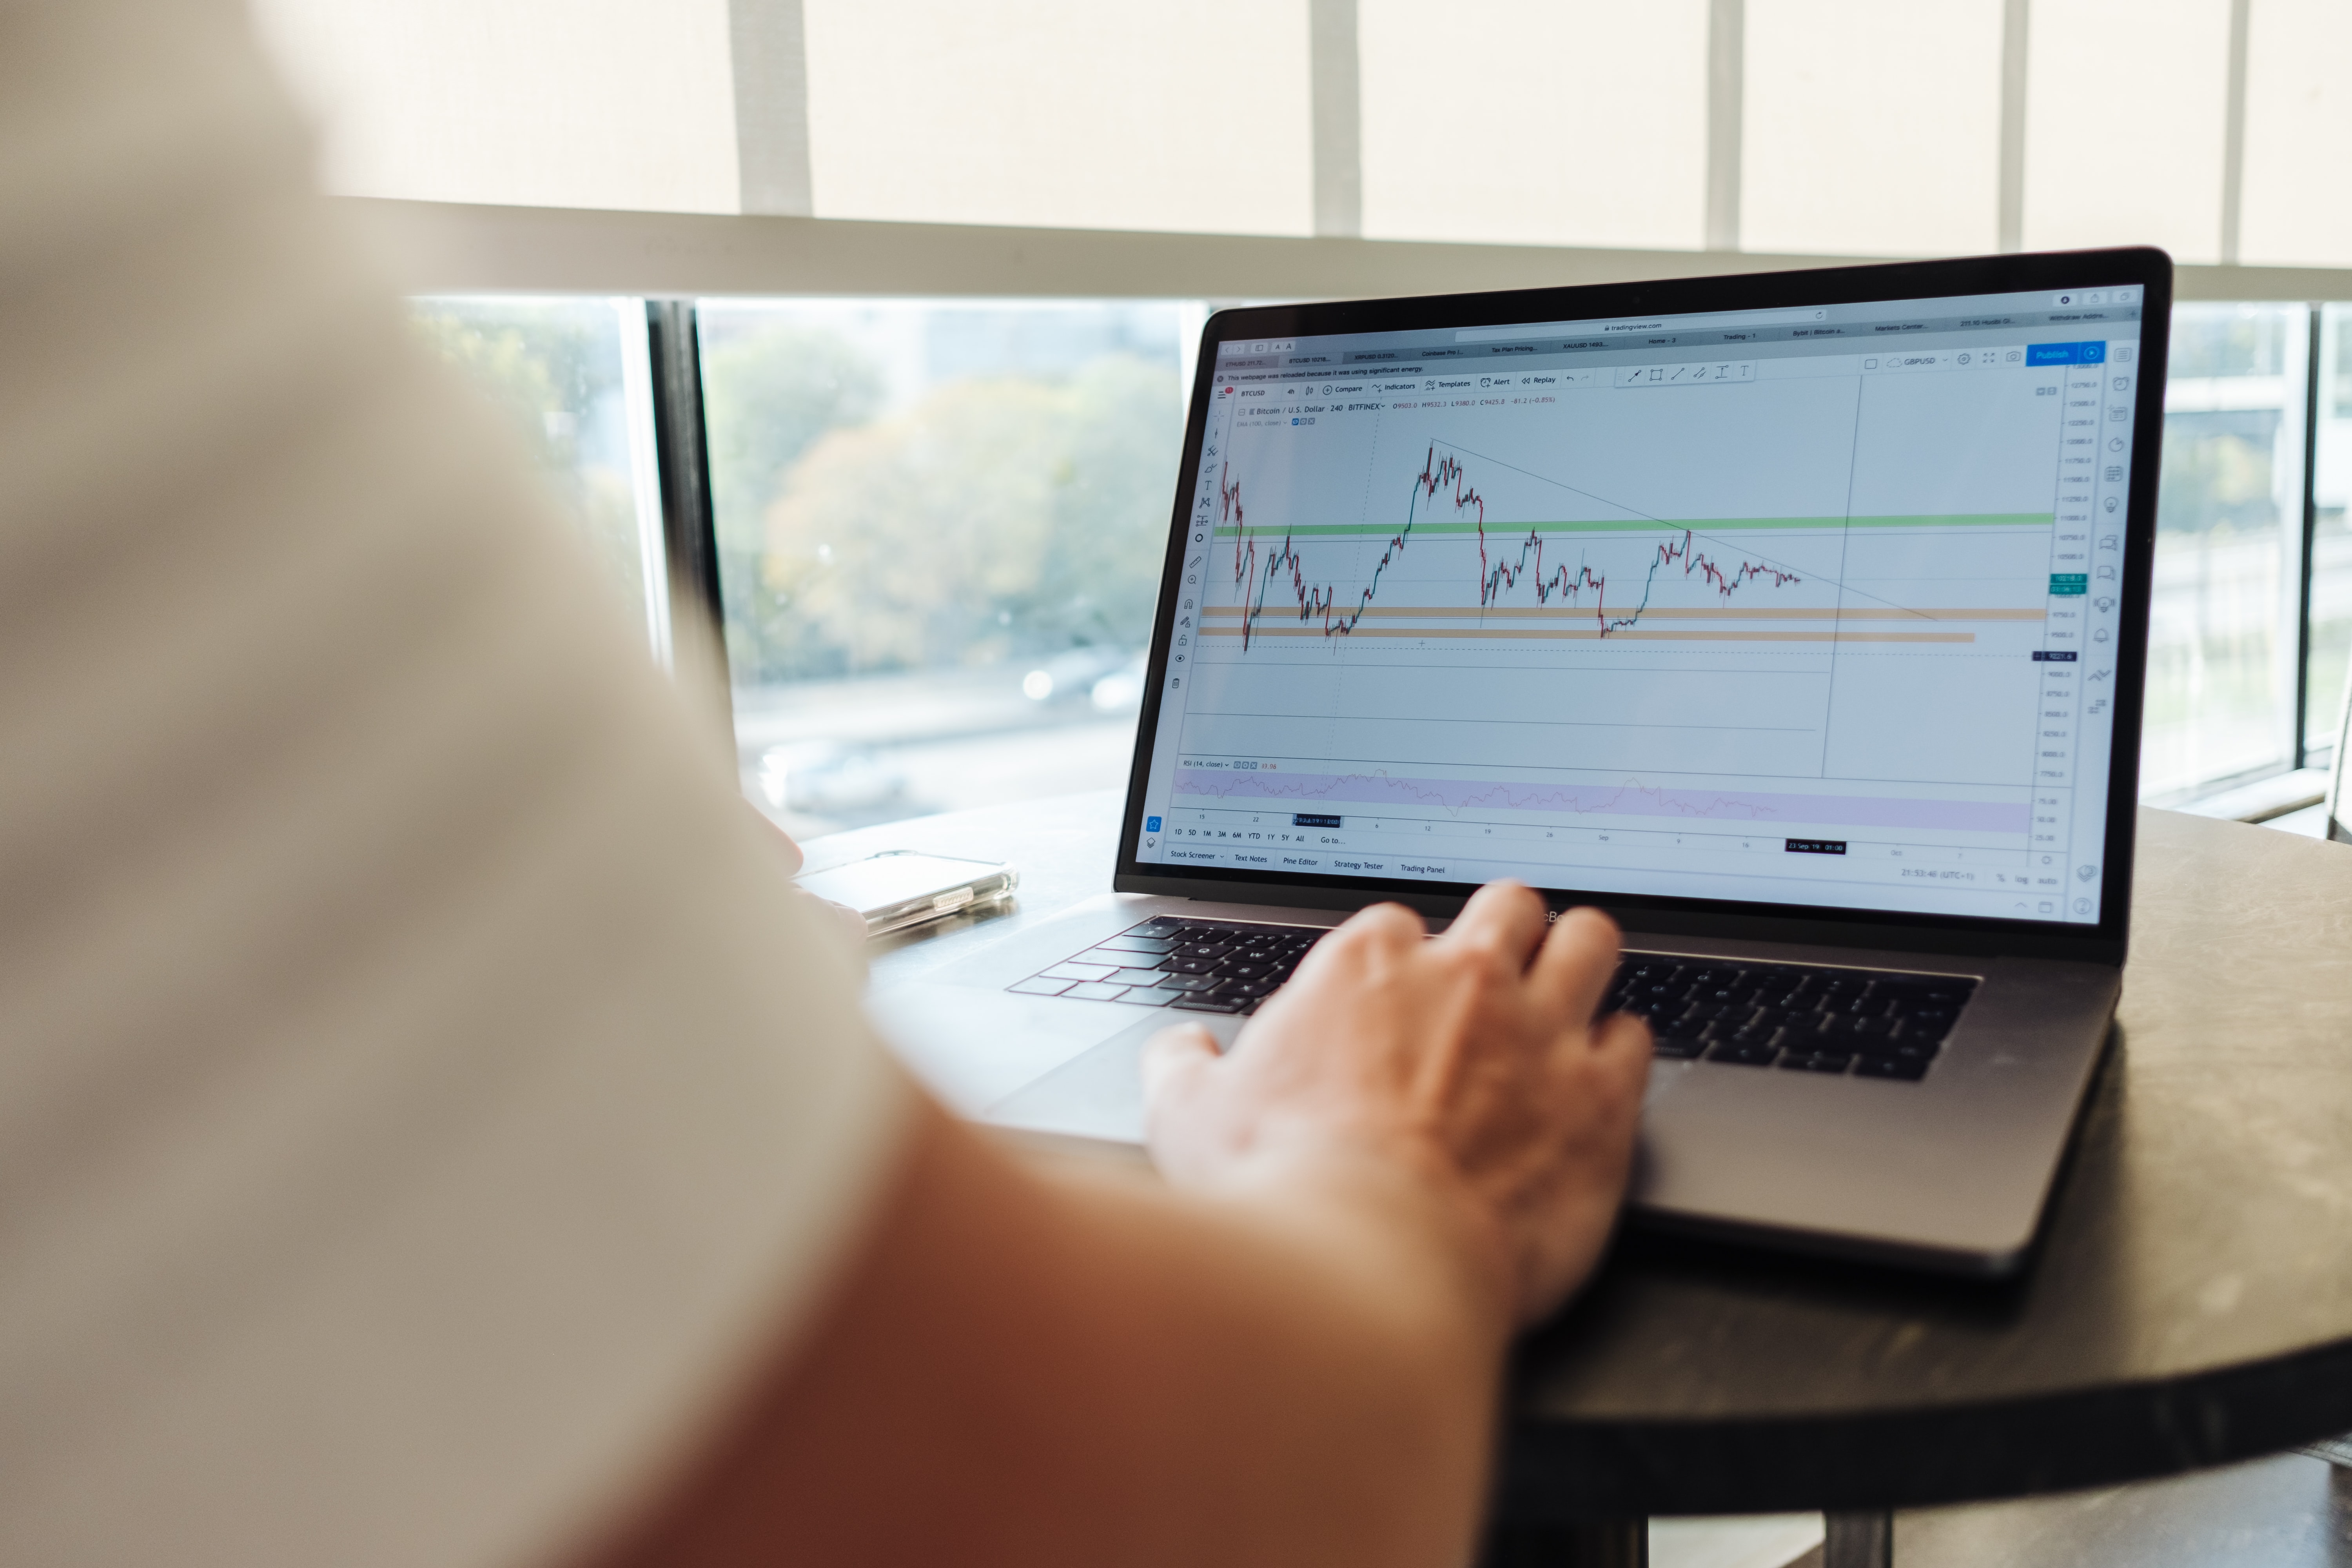 Know the differences between MetaTrader and the other popular online trading platforms